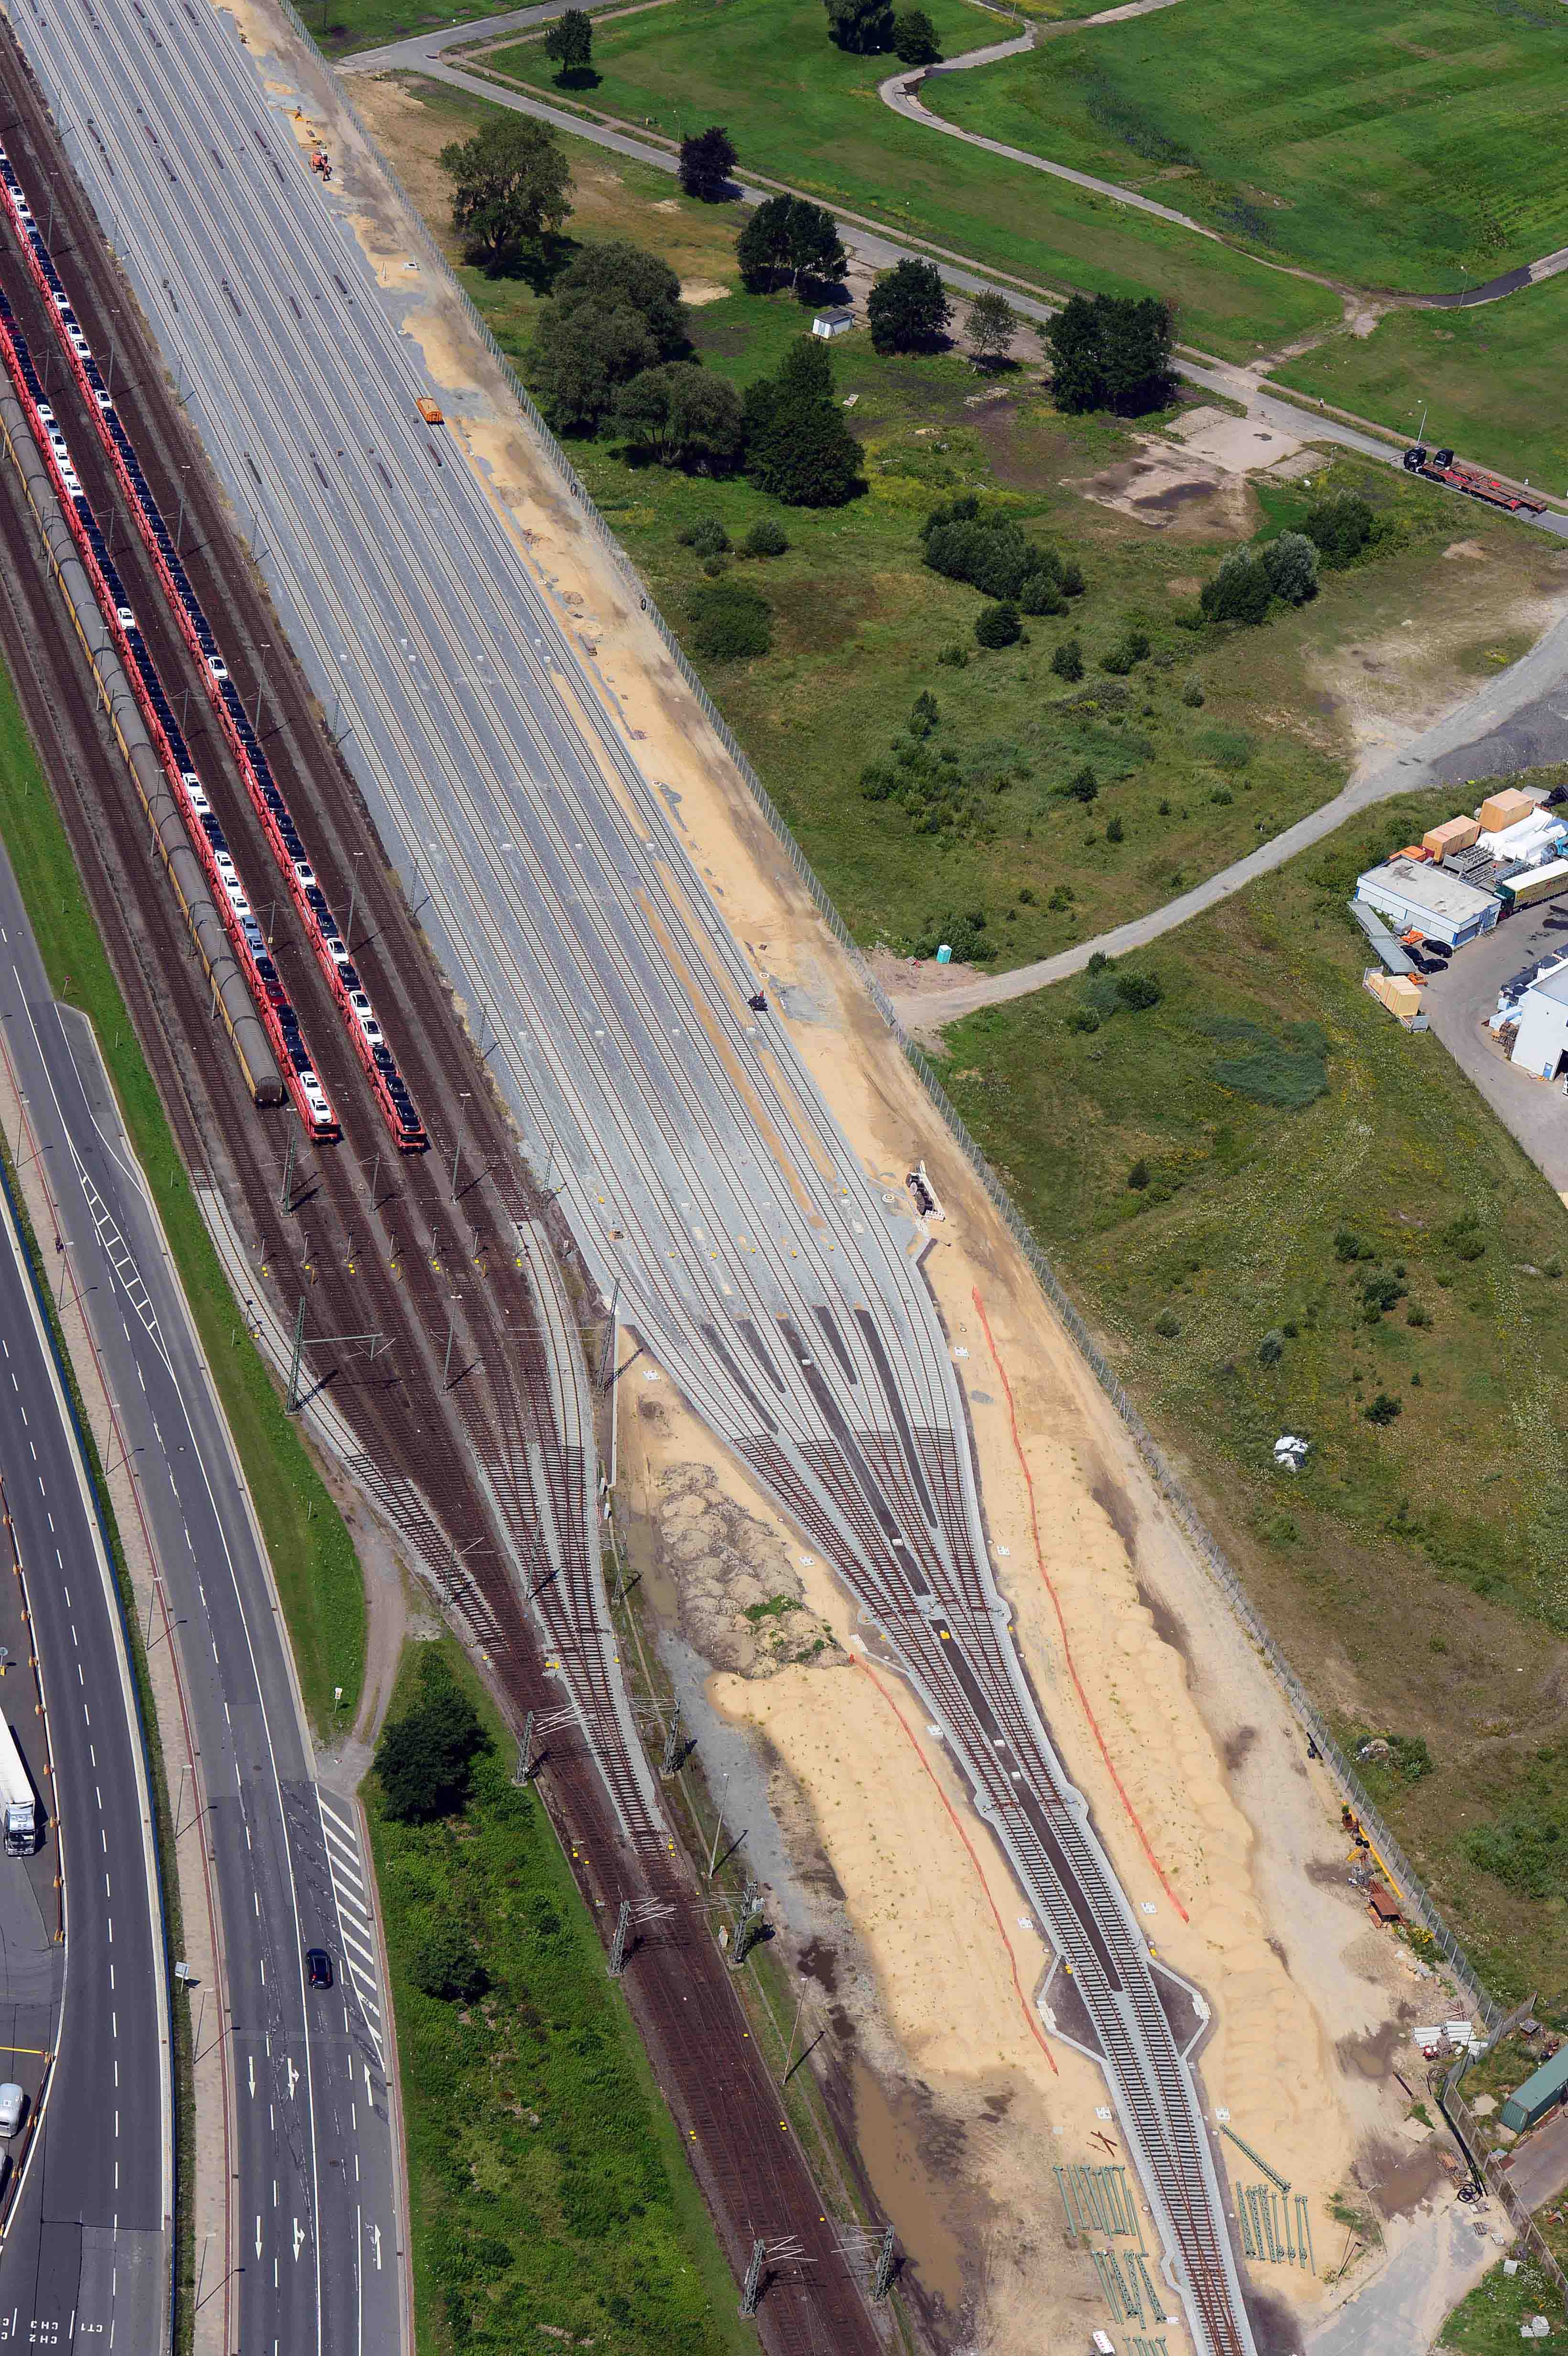 Bremerhaven strengthens its position as a new rail port